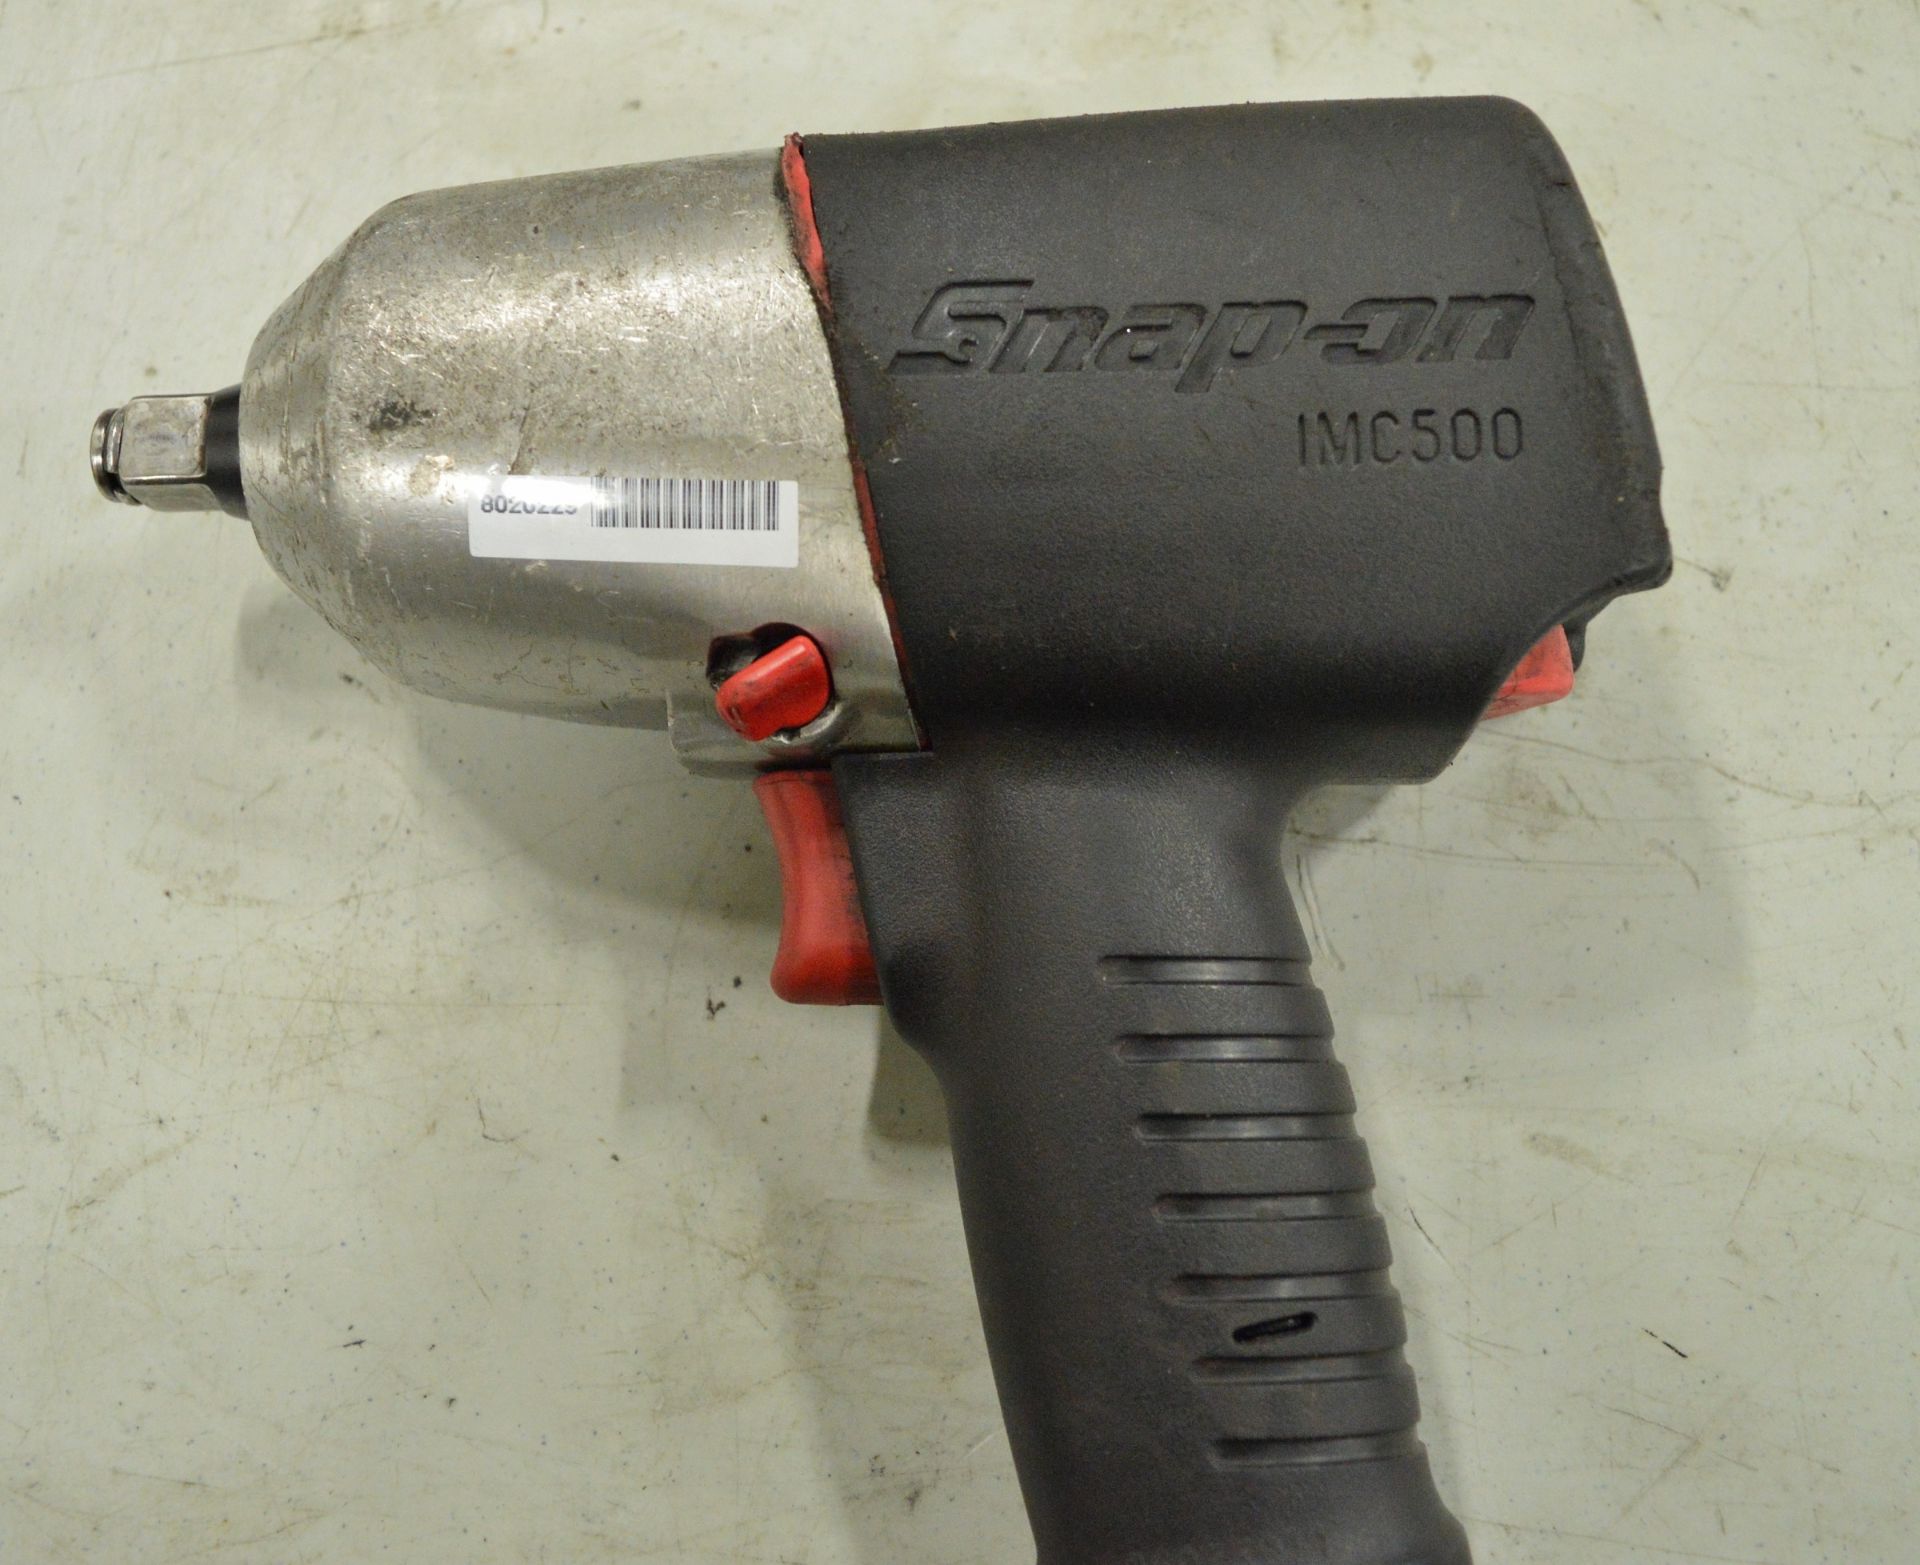 Snap-On IMC500 1/2in Impact Wrench - Image 2 of 2